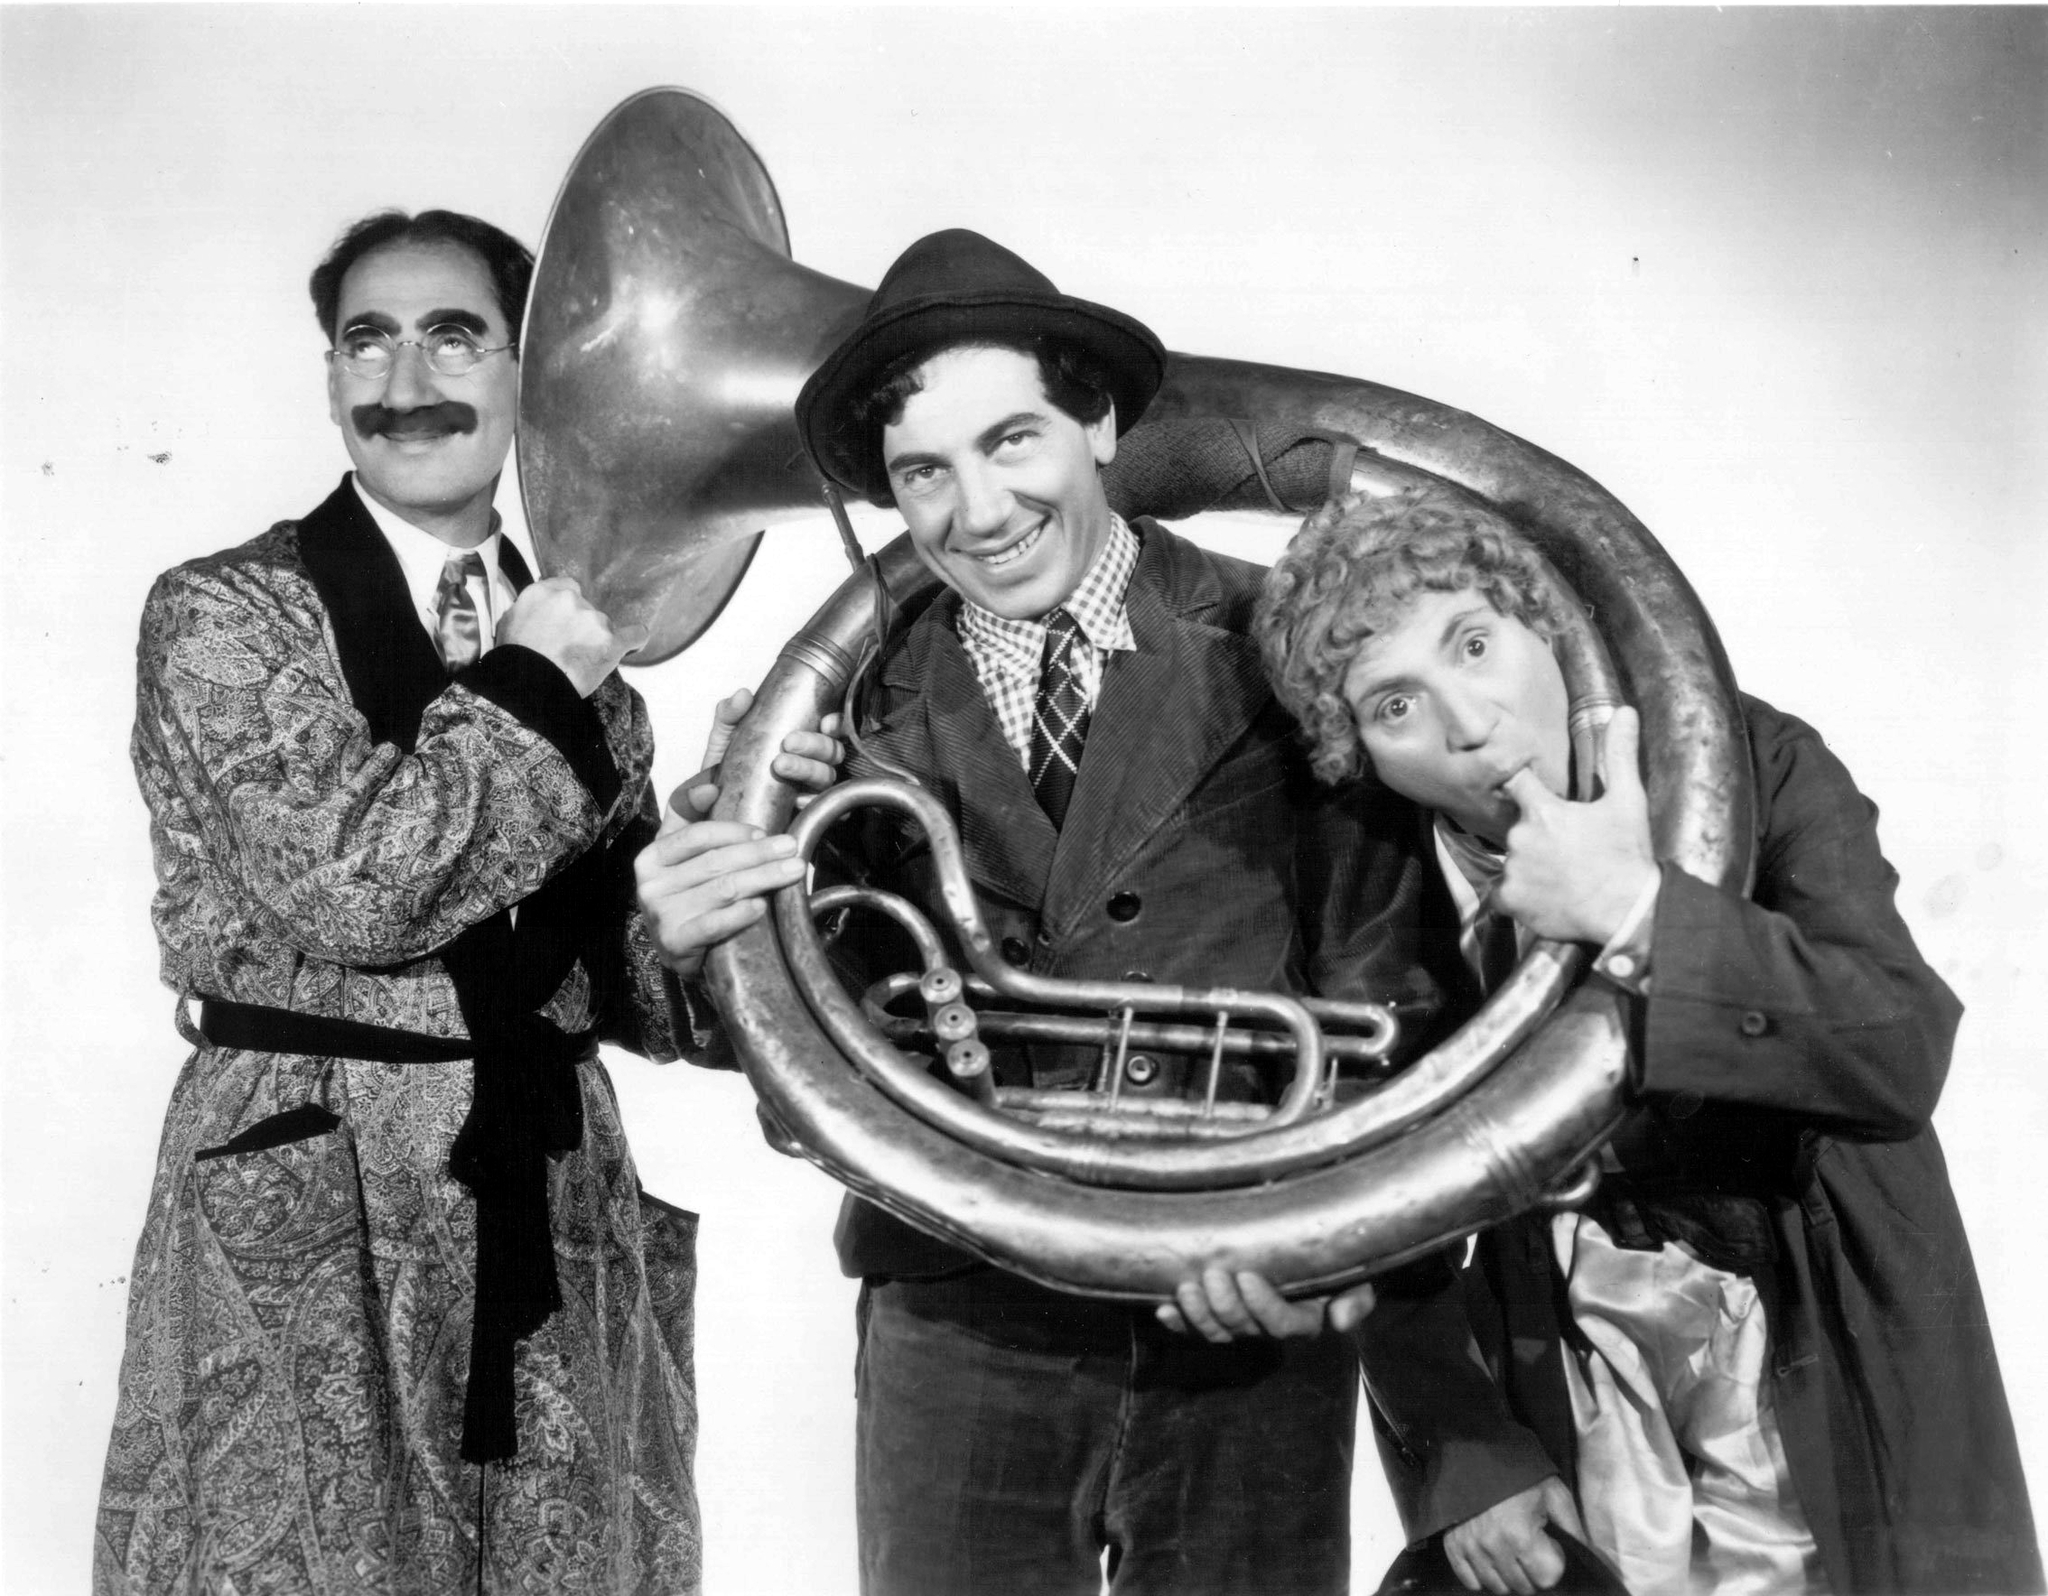 Groucho Marx, Chico Marx and Harpo Marx in A Day at the Races (1937)